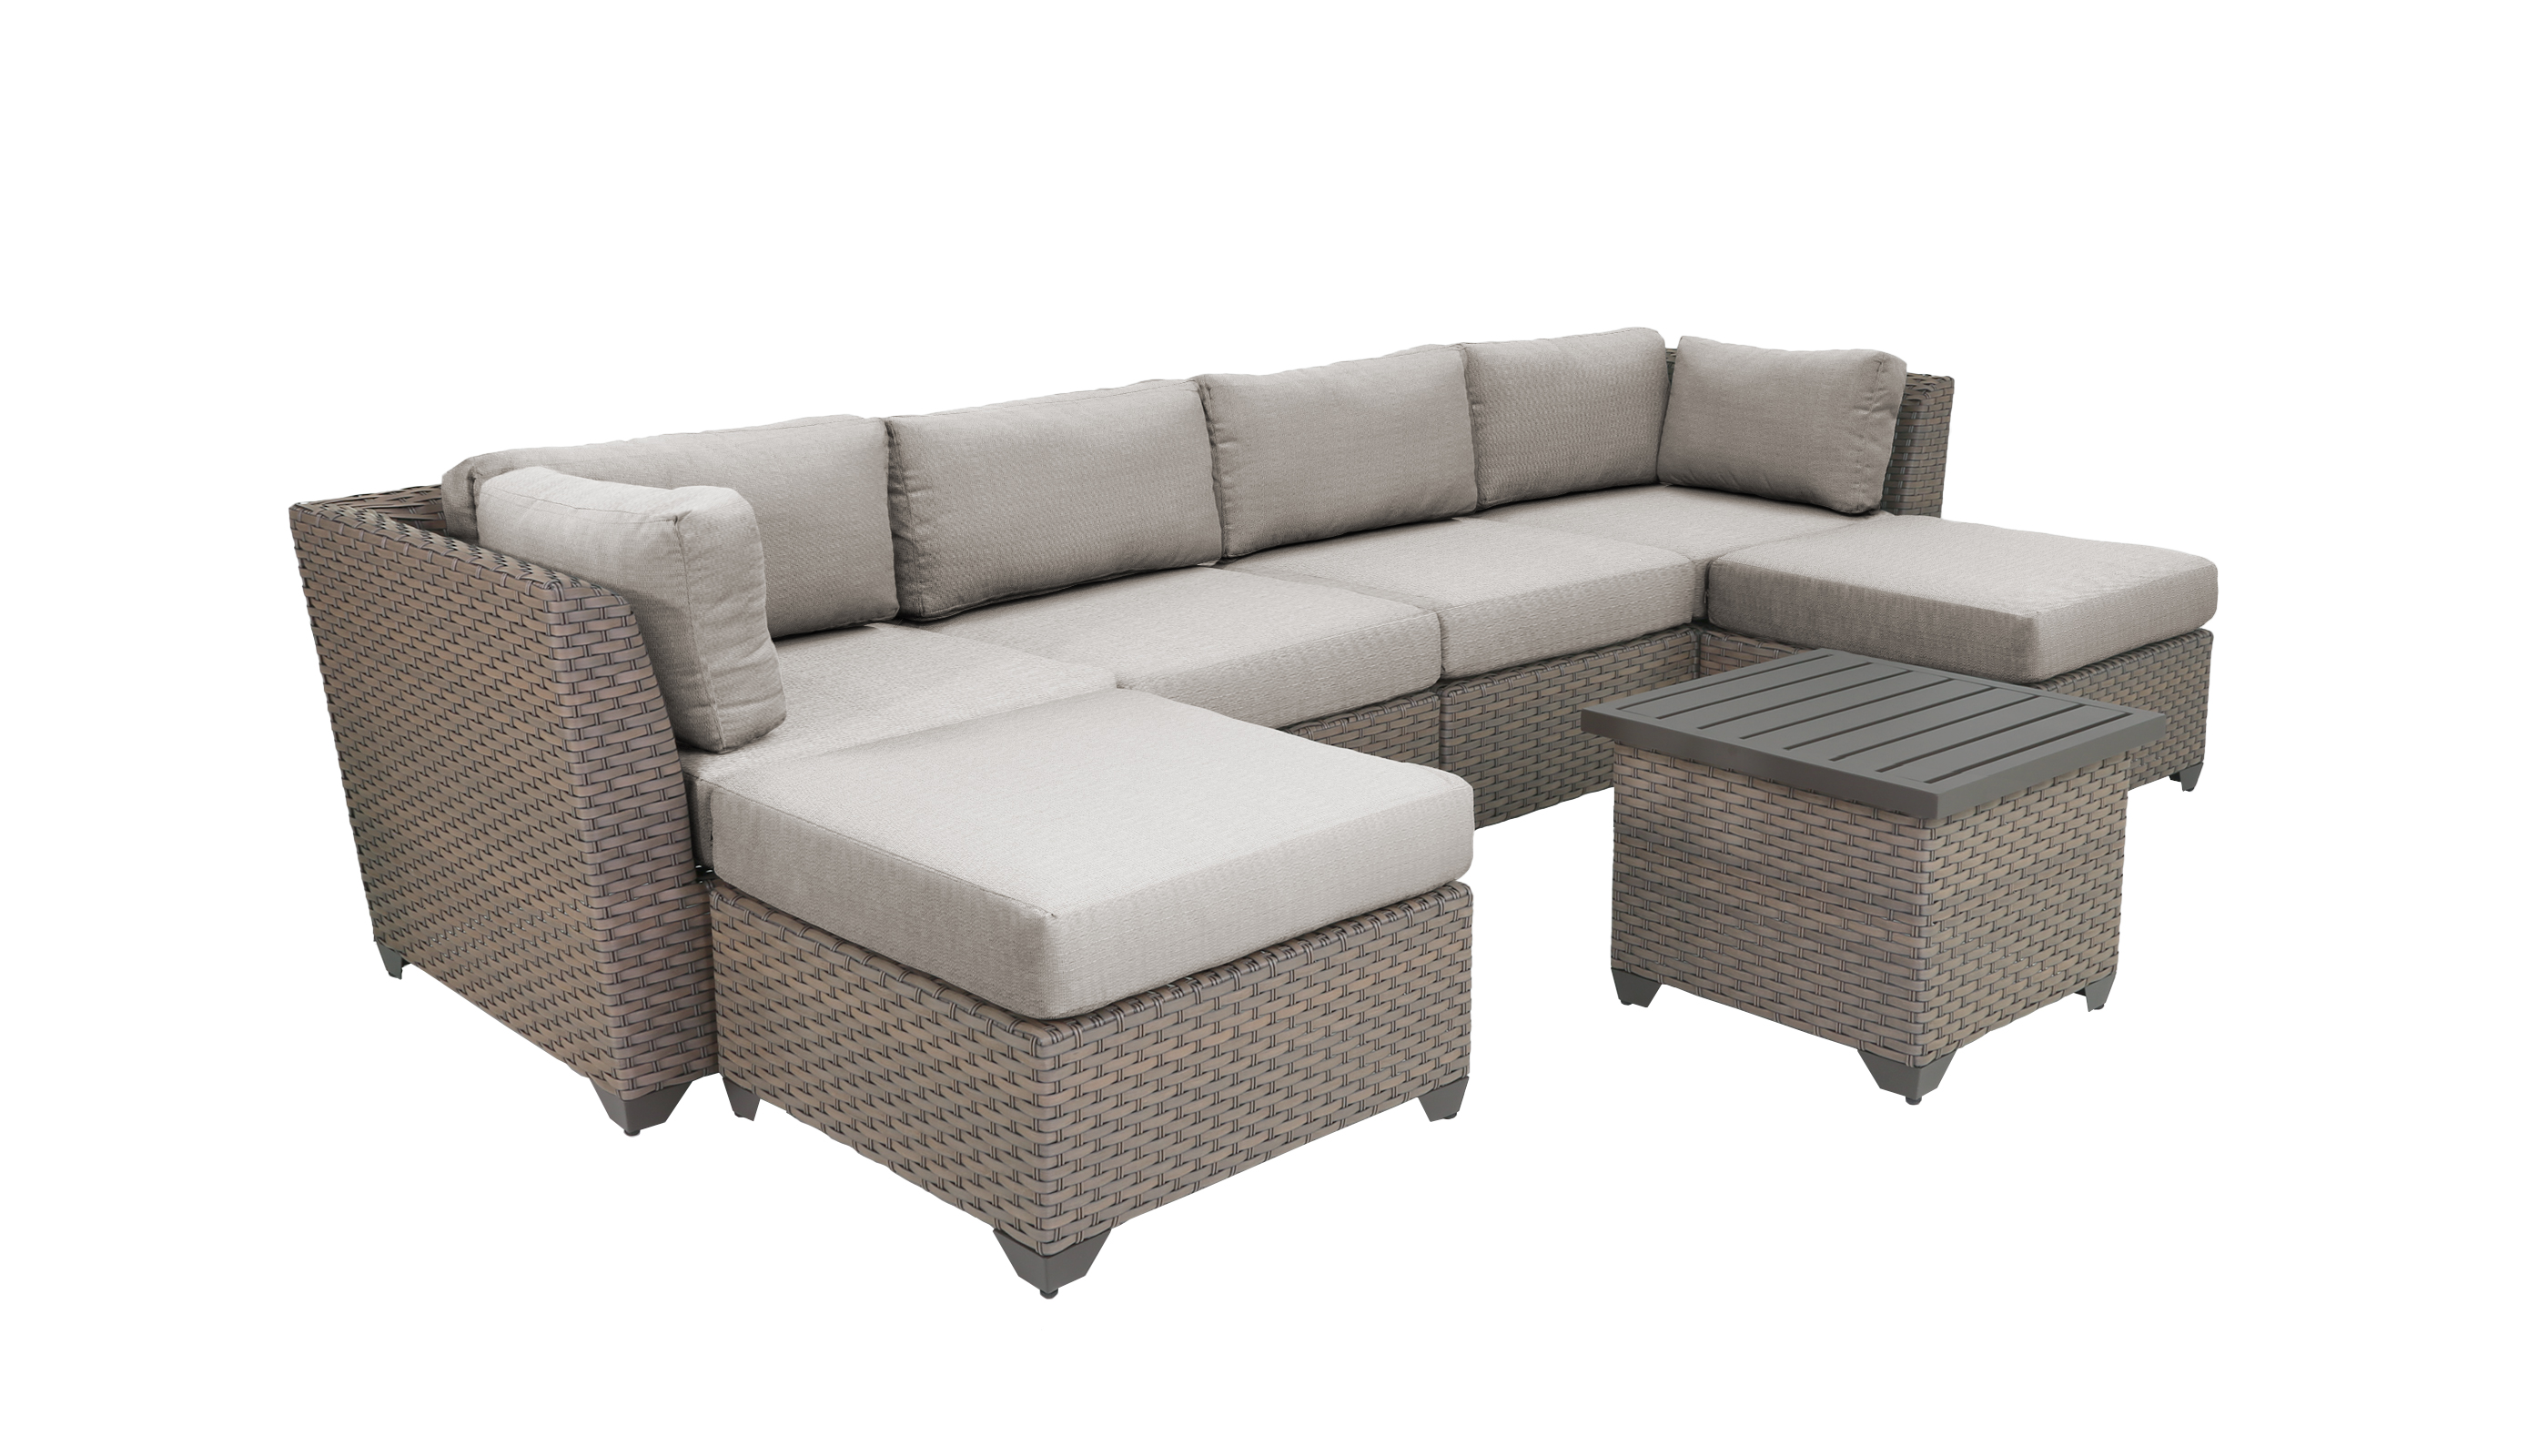 Florence 7 Piece Outdoor Wicker Patio Furniture Set 07a - image 1 of 2